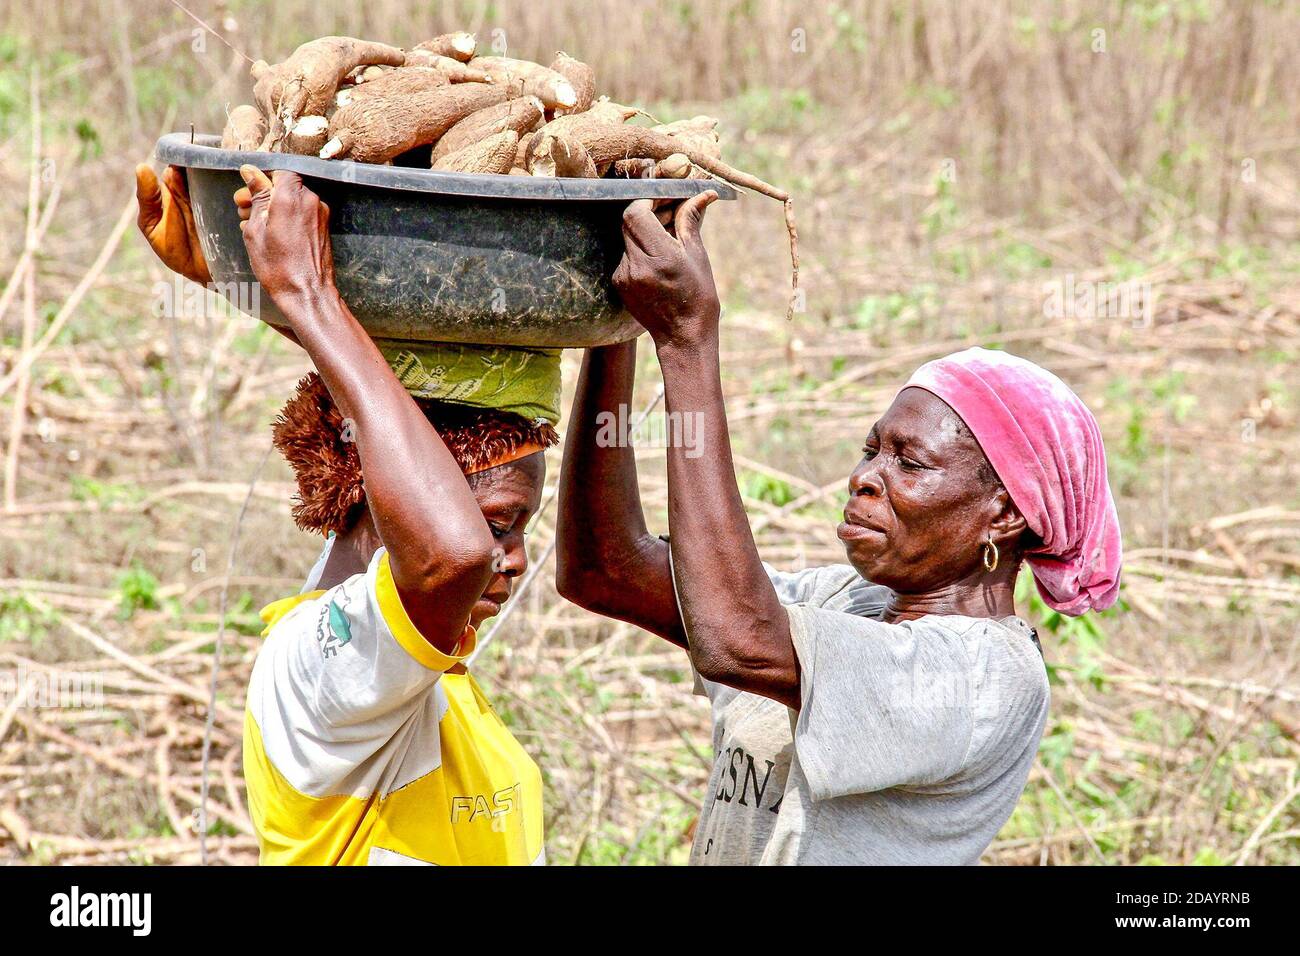 A farmworker in Lalate, a small area in Oyo state, Nigeria, helps another put a bowl of cassava roots on her head to carry to a nearby truck, which will deliver it to a processing factory. Stock Photo